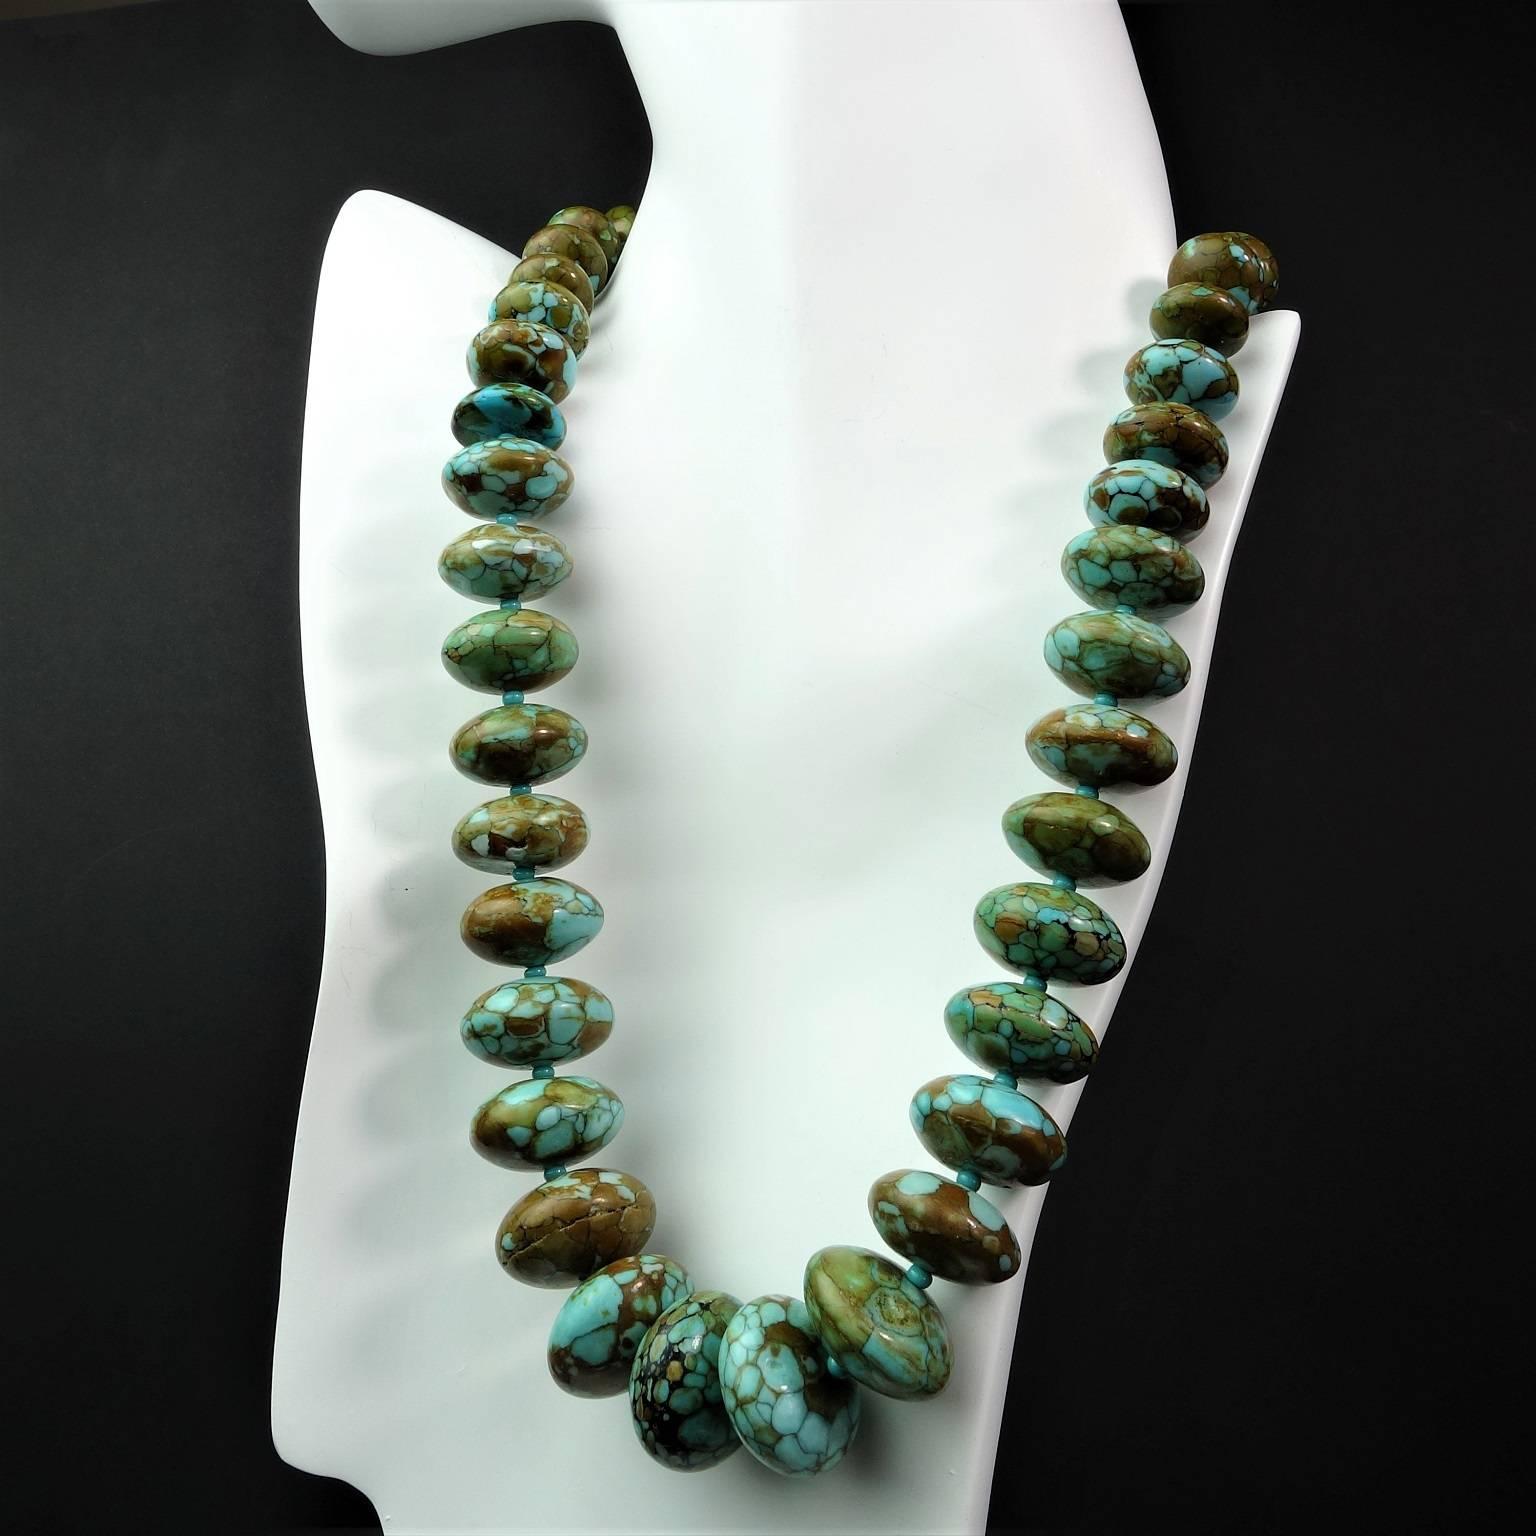 Graduated, Polished rondels of patterned Turquoise, accented with small blue seed beads. 
Size: graduated up to 20mm
Length: 19 inches
Clasp: silver tone
More from this seller by putting gemjunky into 1stdibs search bar.
